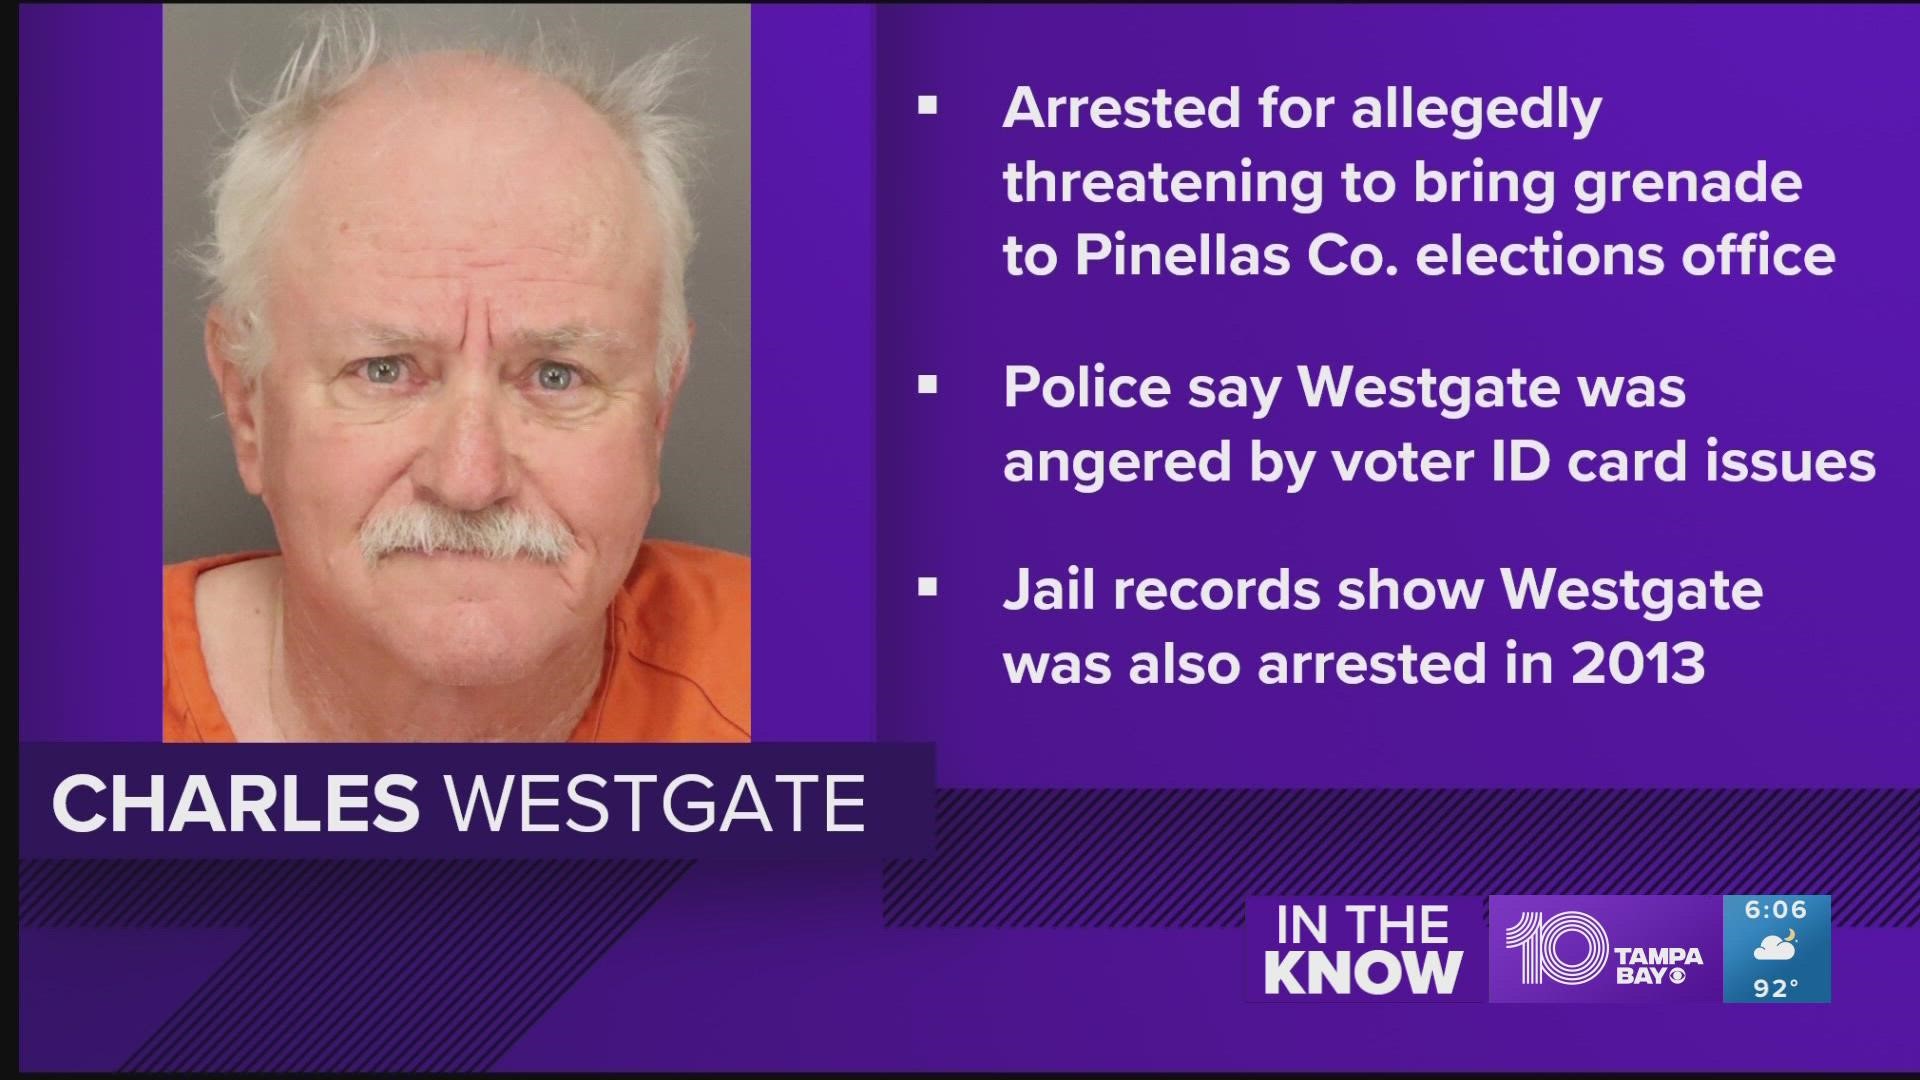 The man denied the accusations and refused to answer questions after being taken into custody, according to an arrest affidavit.